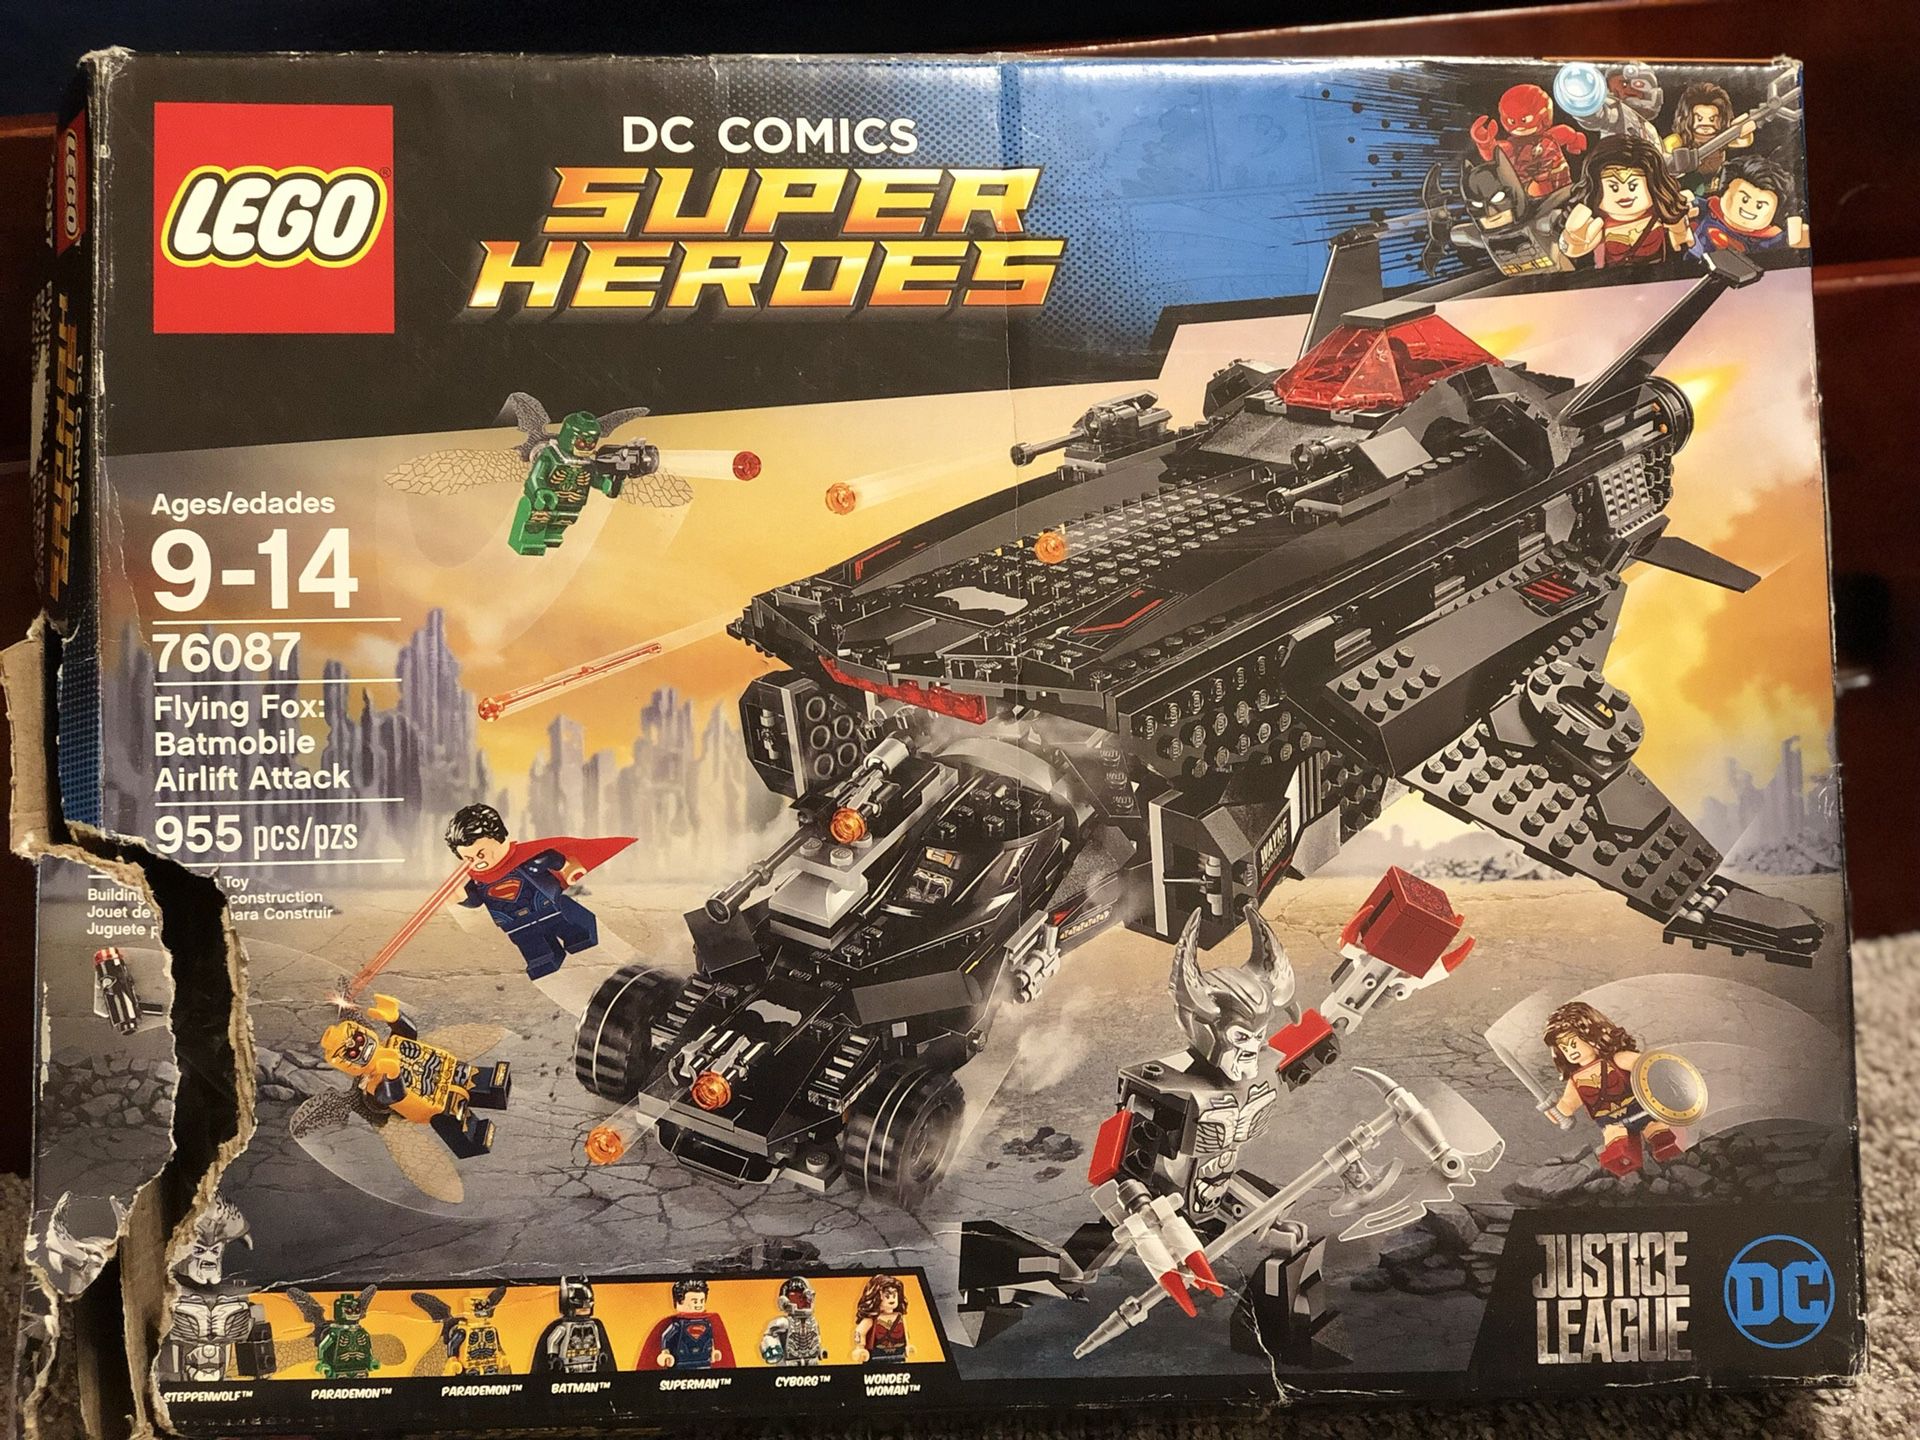 Lego DC Comics Super Heroes Flying Fox Batmobile Airlift Attack 76087 NEW Complete & Sealed for Sale in Bellflower, CA - OfferUp